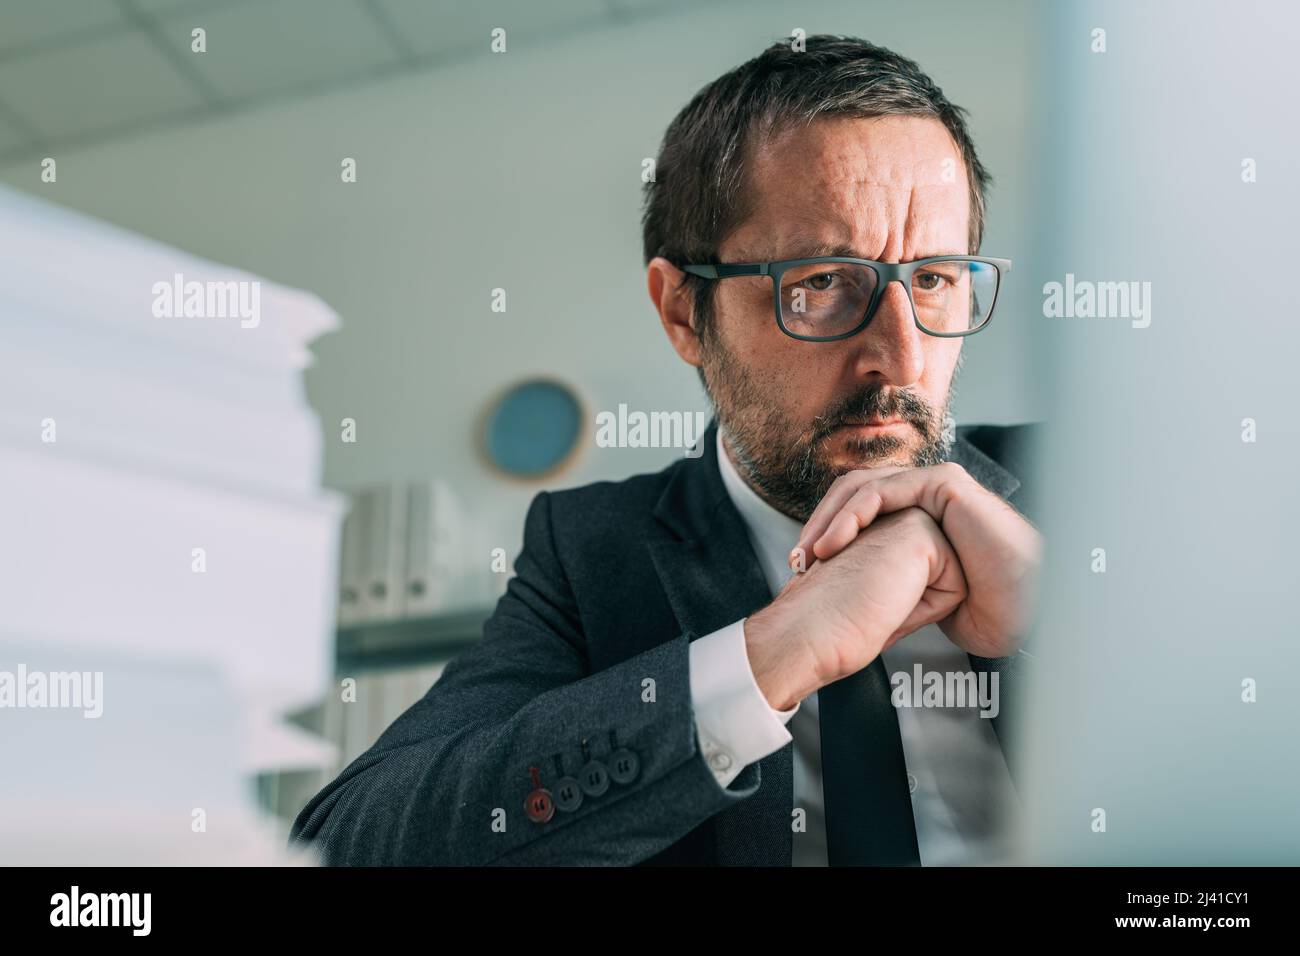 Distressed businessman looking at laptop screen in business office, selective focus Stock Photo